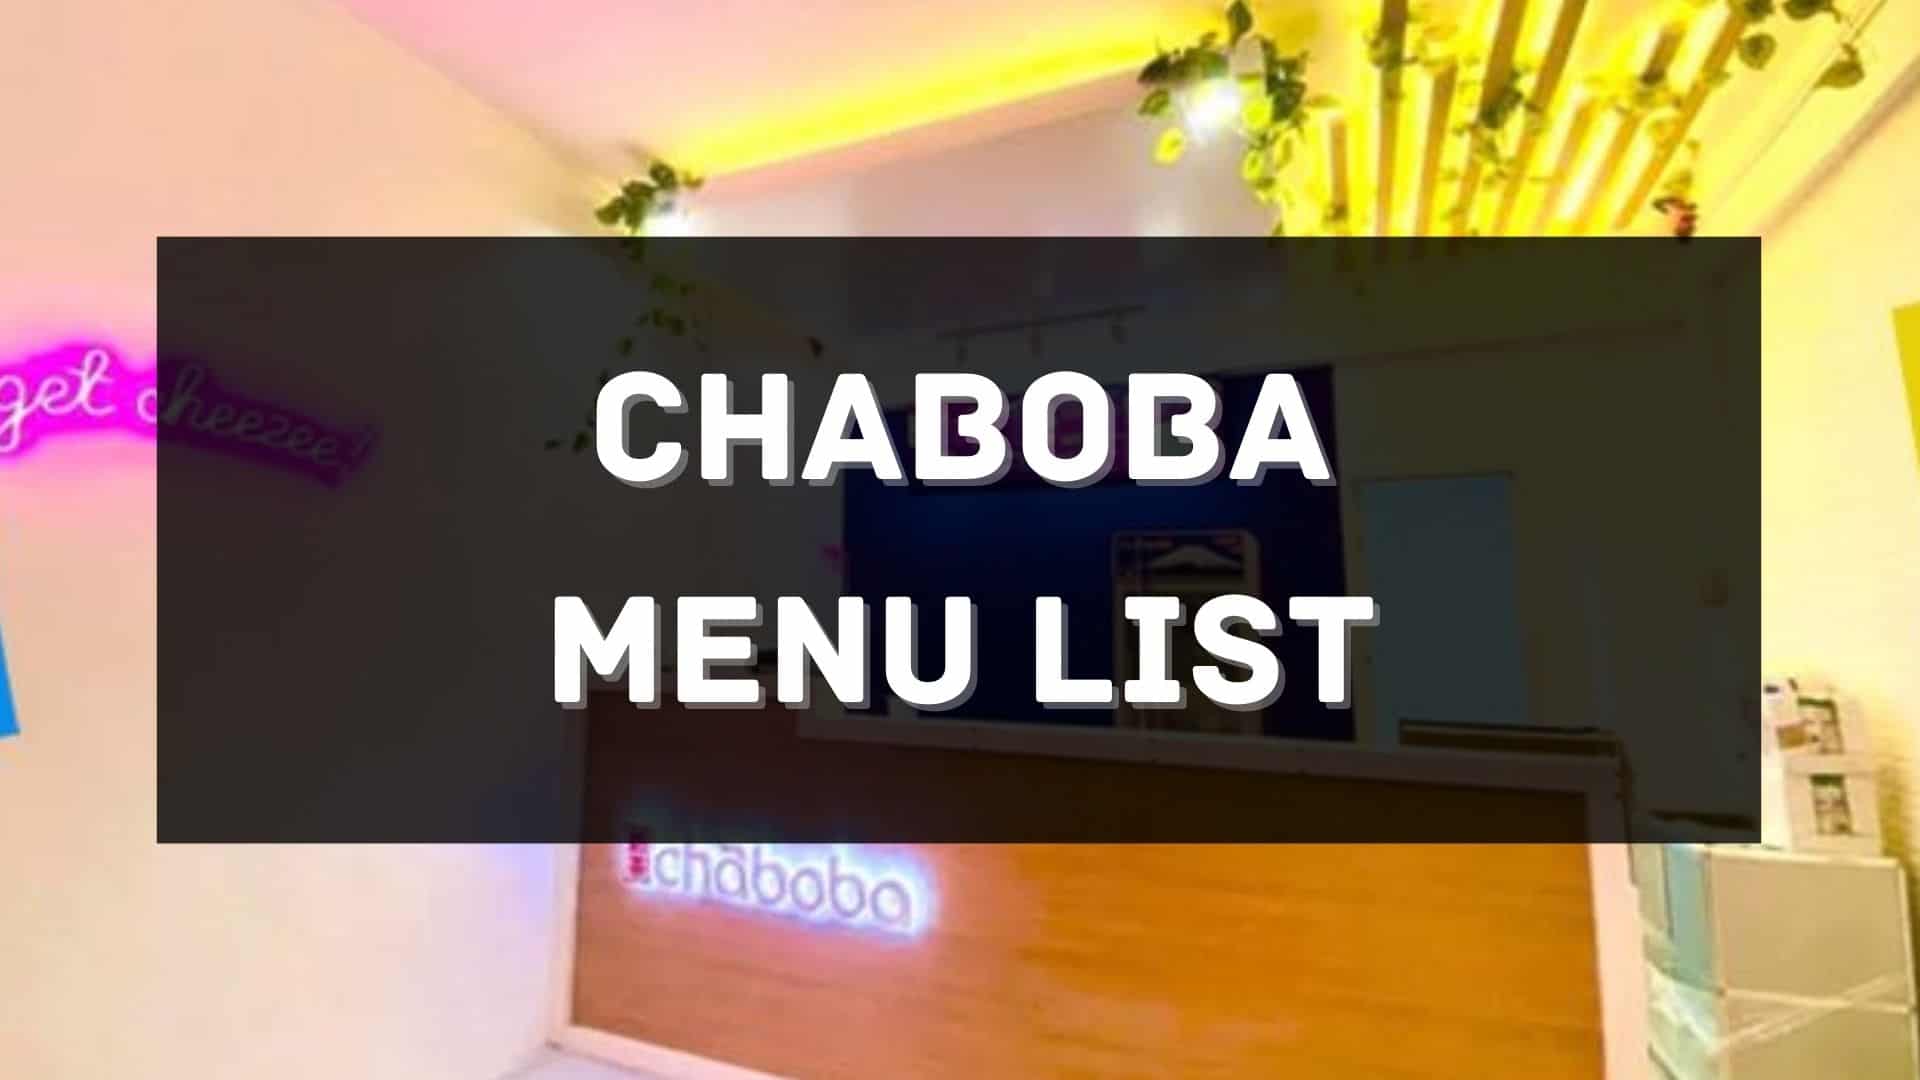 chaboba menu prices philippines